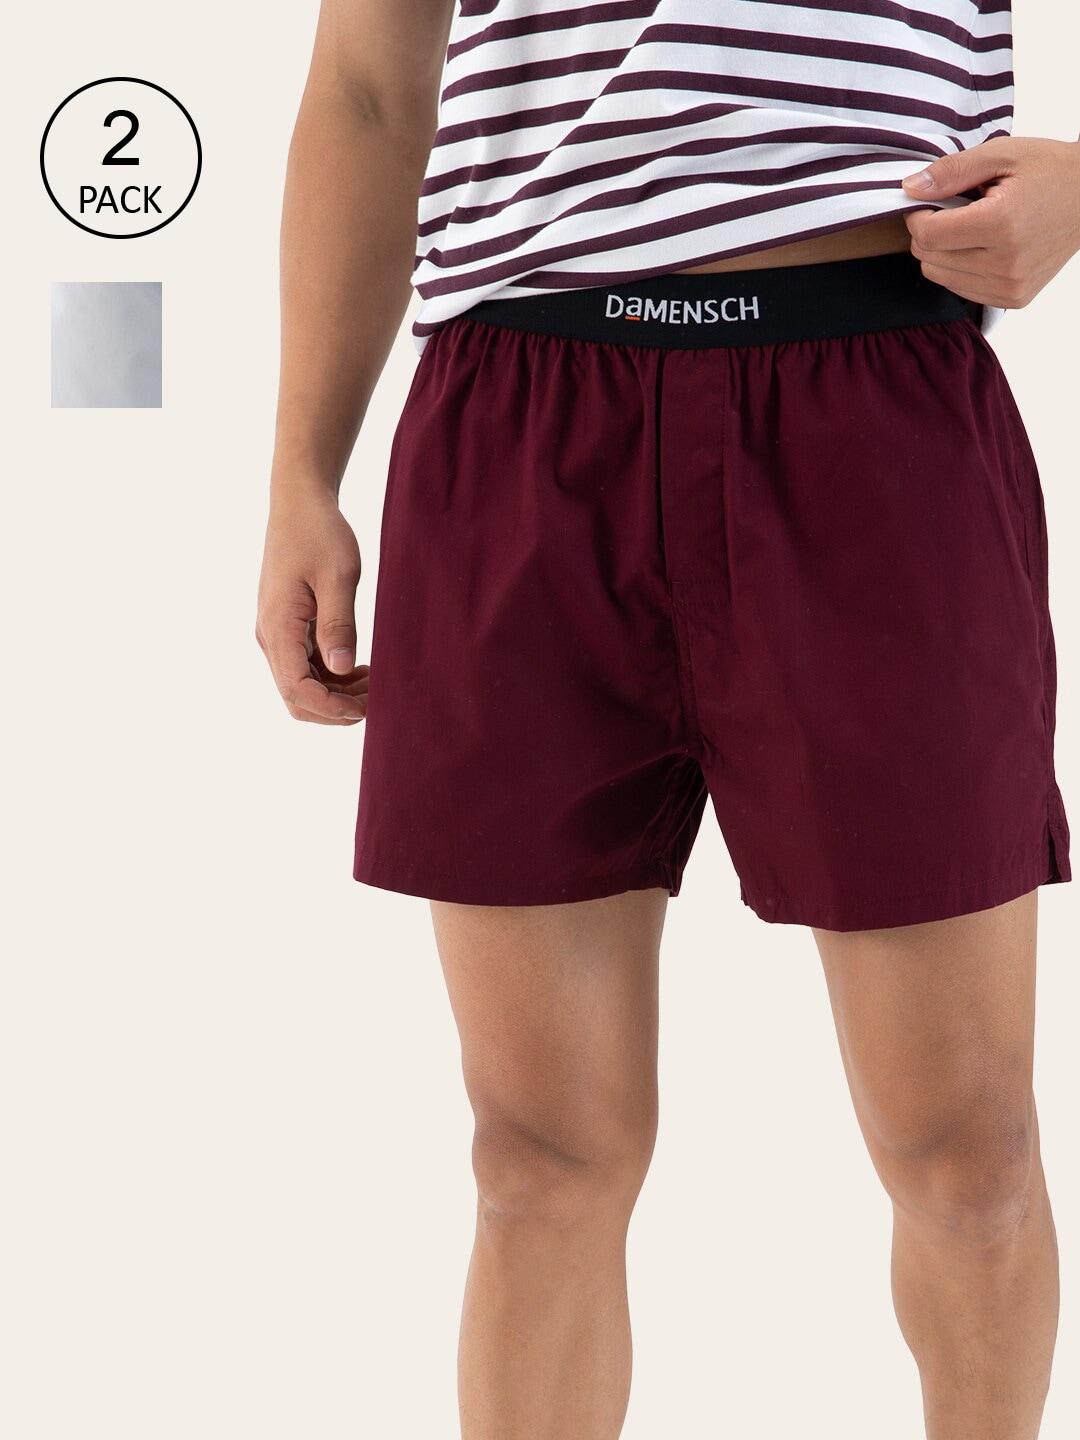 damensch pack of 2 men maroon & grey solid cotton boxers dam-sld-sbx-pack-2-viw-gyt-mix